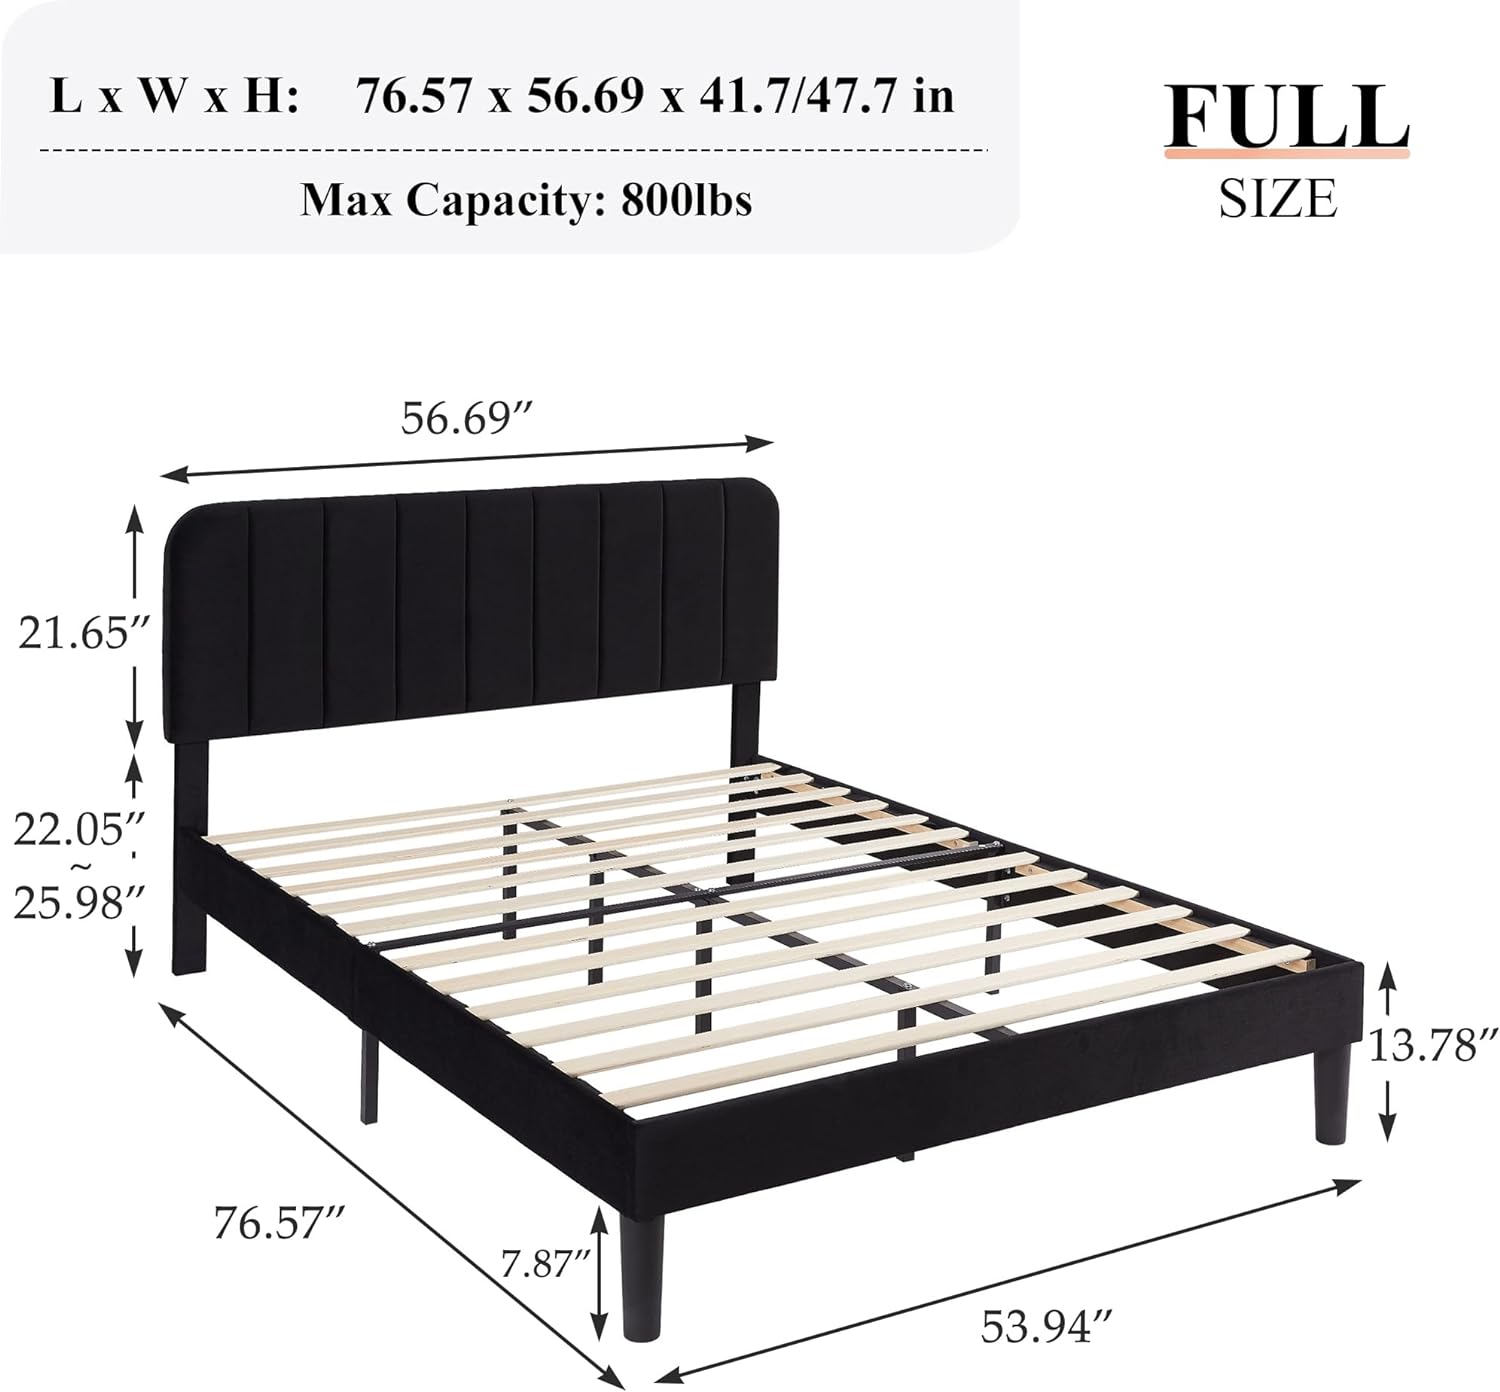 VECELO Twin Size Bed Frame with Adjustable Headboard, Velvet Heavy Duty Platform Beds with Strong Wood Slats Support